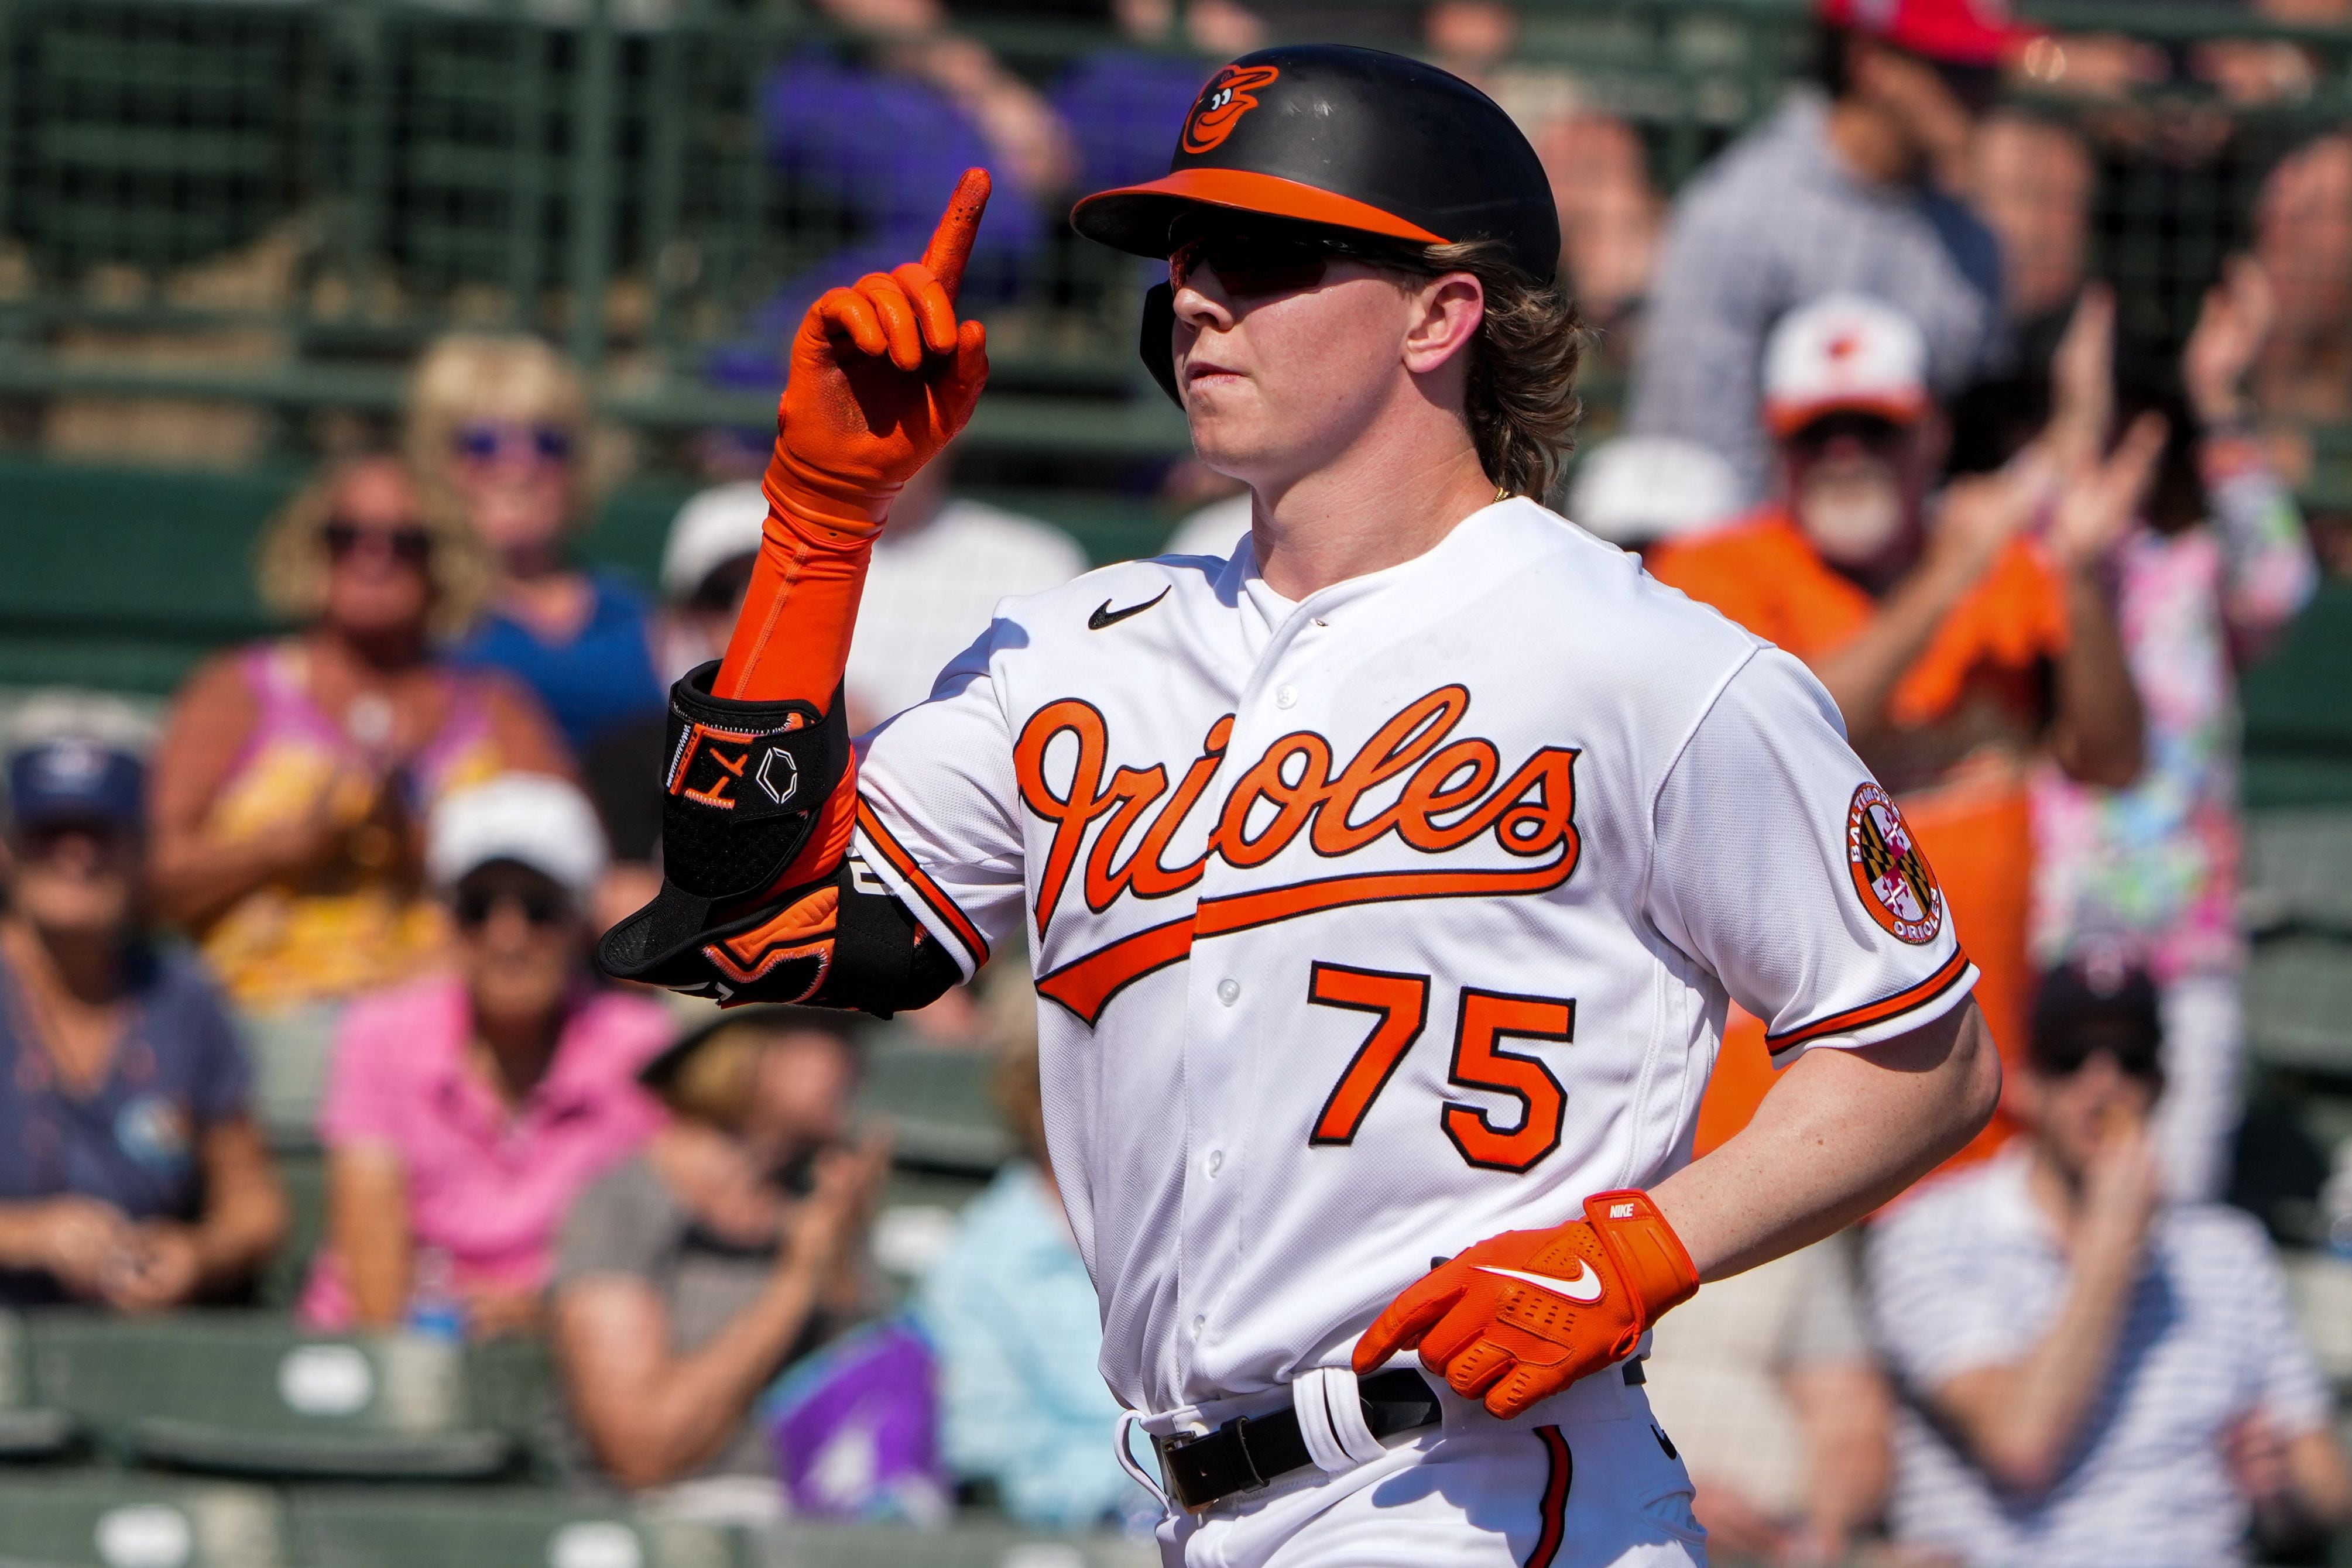 Kjerstad to make MLB playoff debut with Orioles today